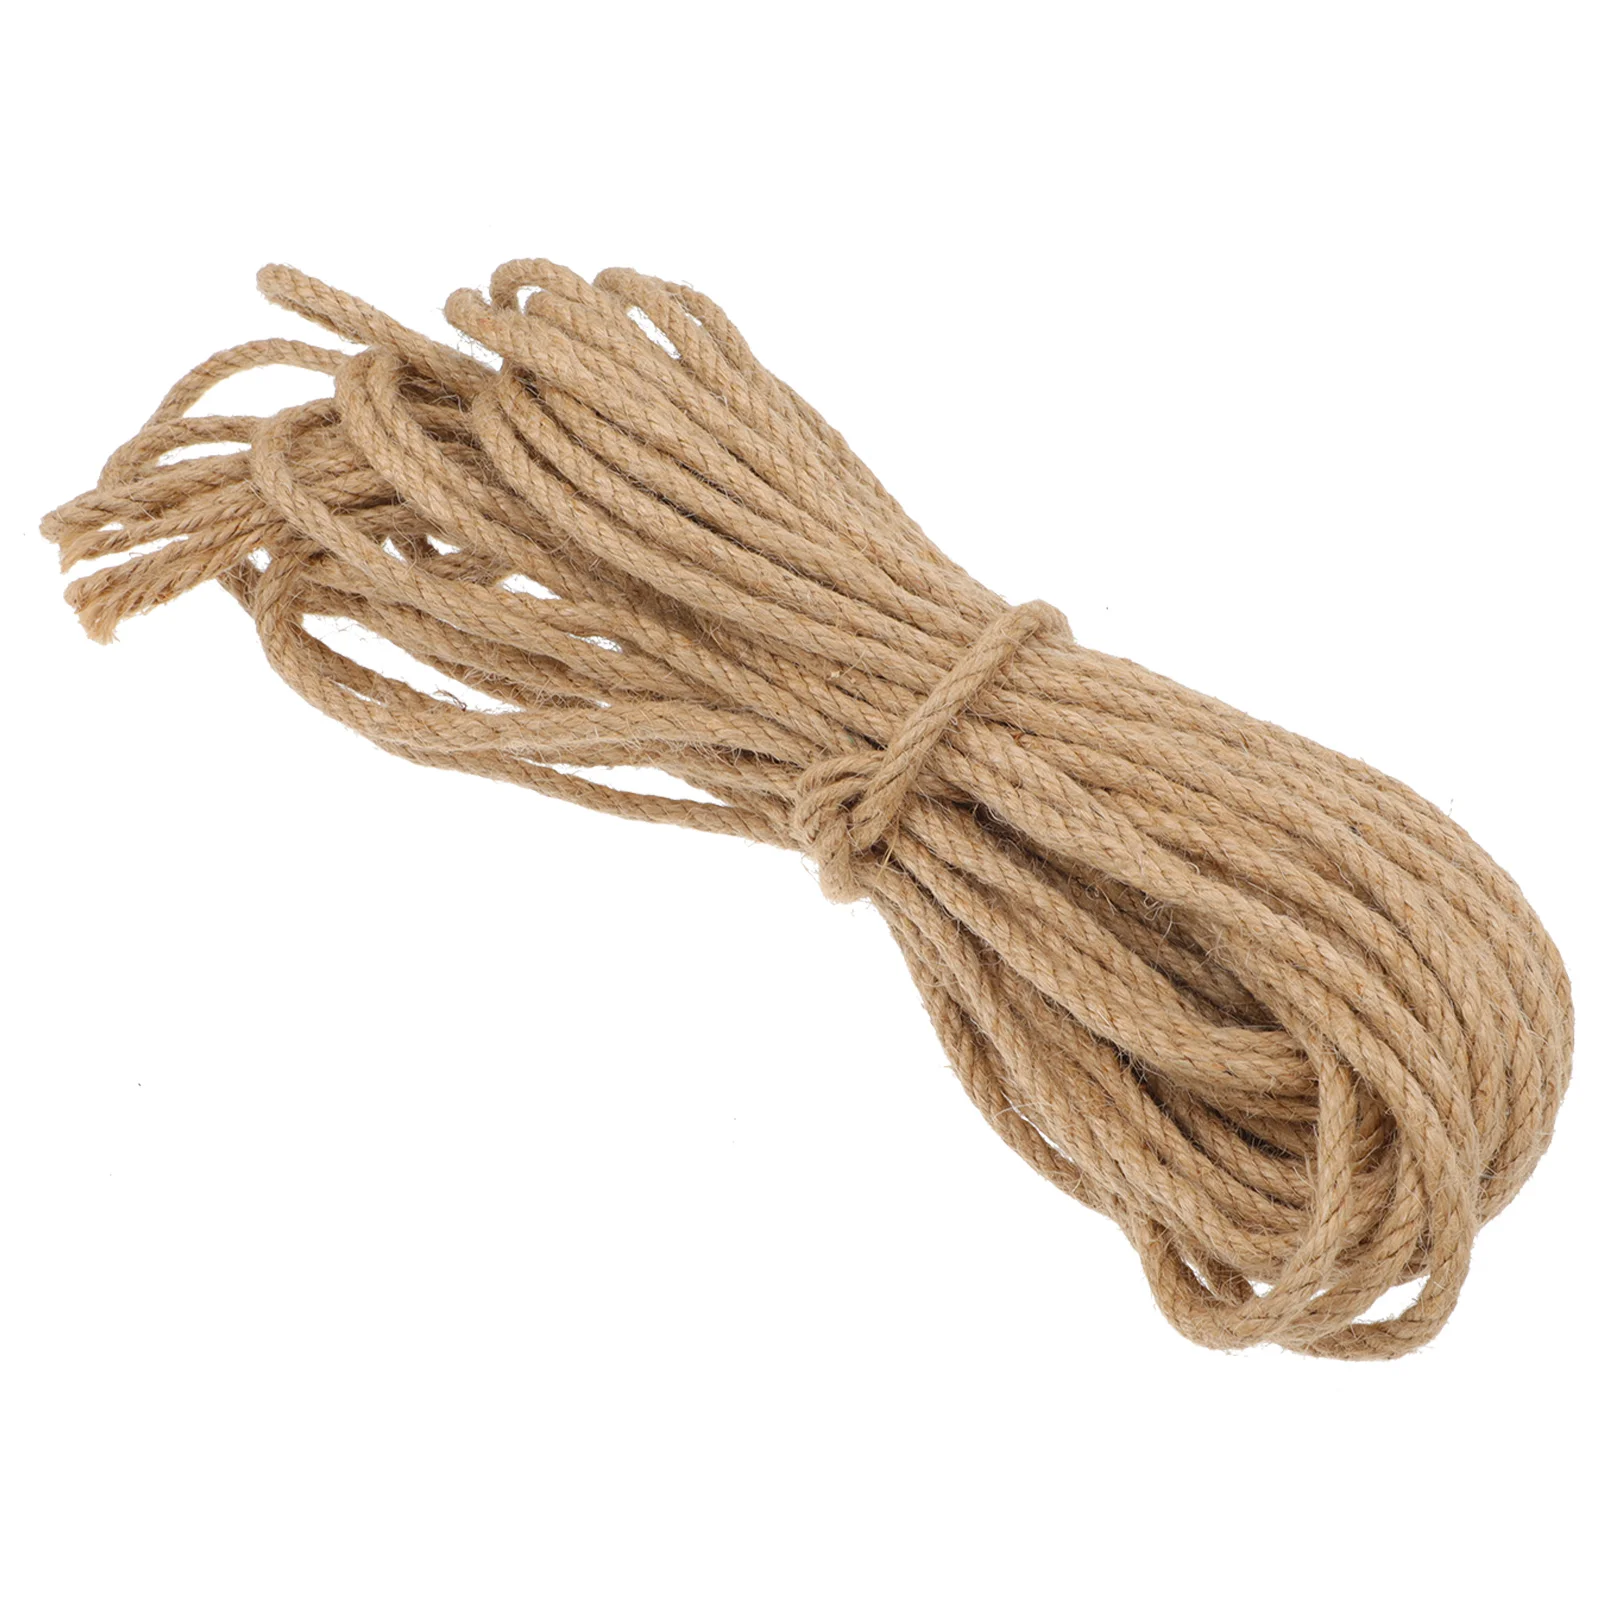 

Rope Twine String Jute Crafts Gift Wrapping Post Gardening Hanger Picture Climbing Thick Cat Natural Bundling Ribbon Scratch